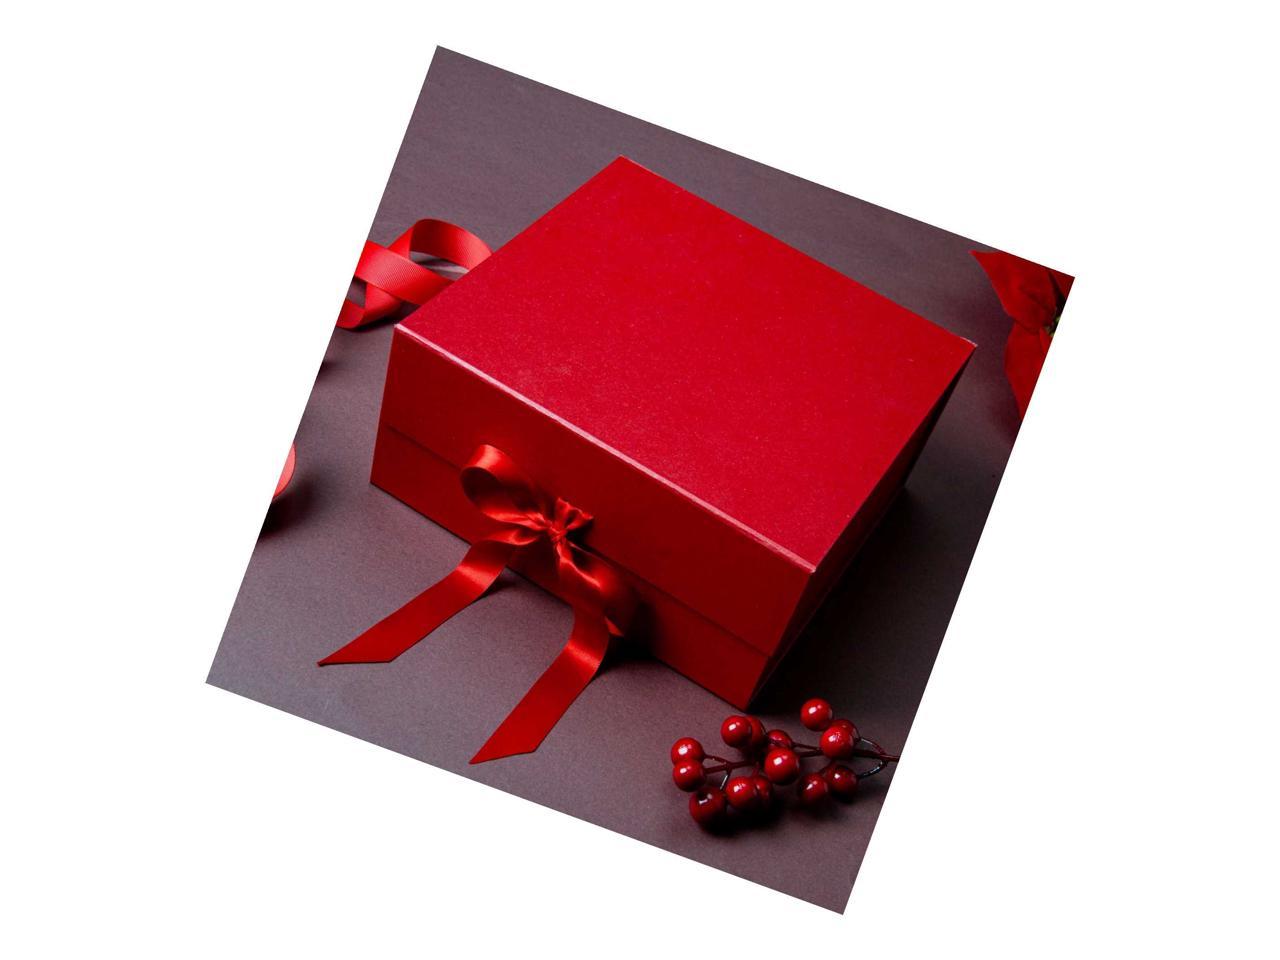 2Pcs Red Gift Box With Satin Ribbon, 8X8X4 Inches